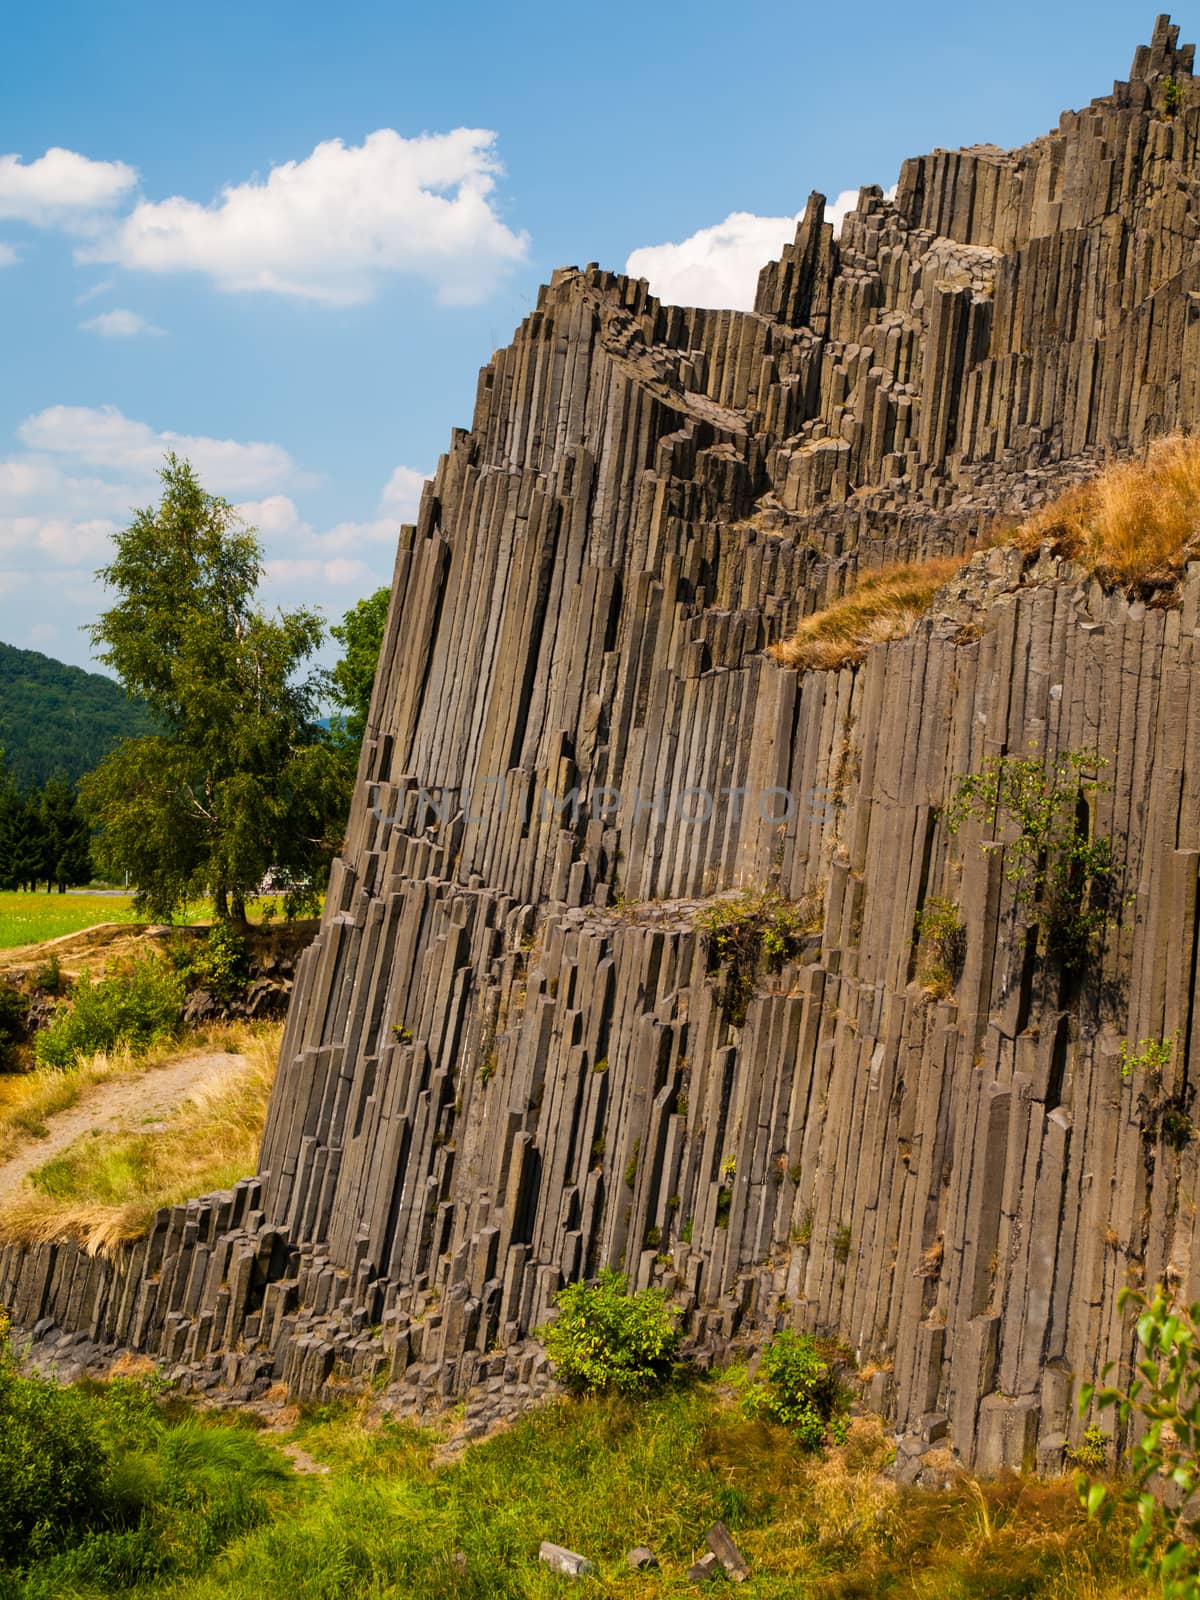 Basalt organ pipes by pyty